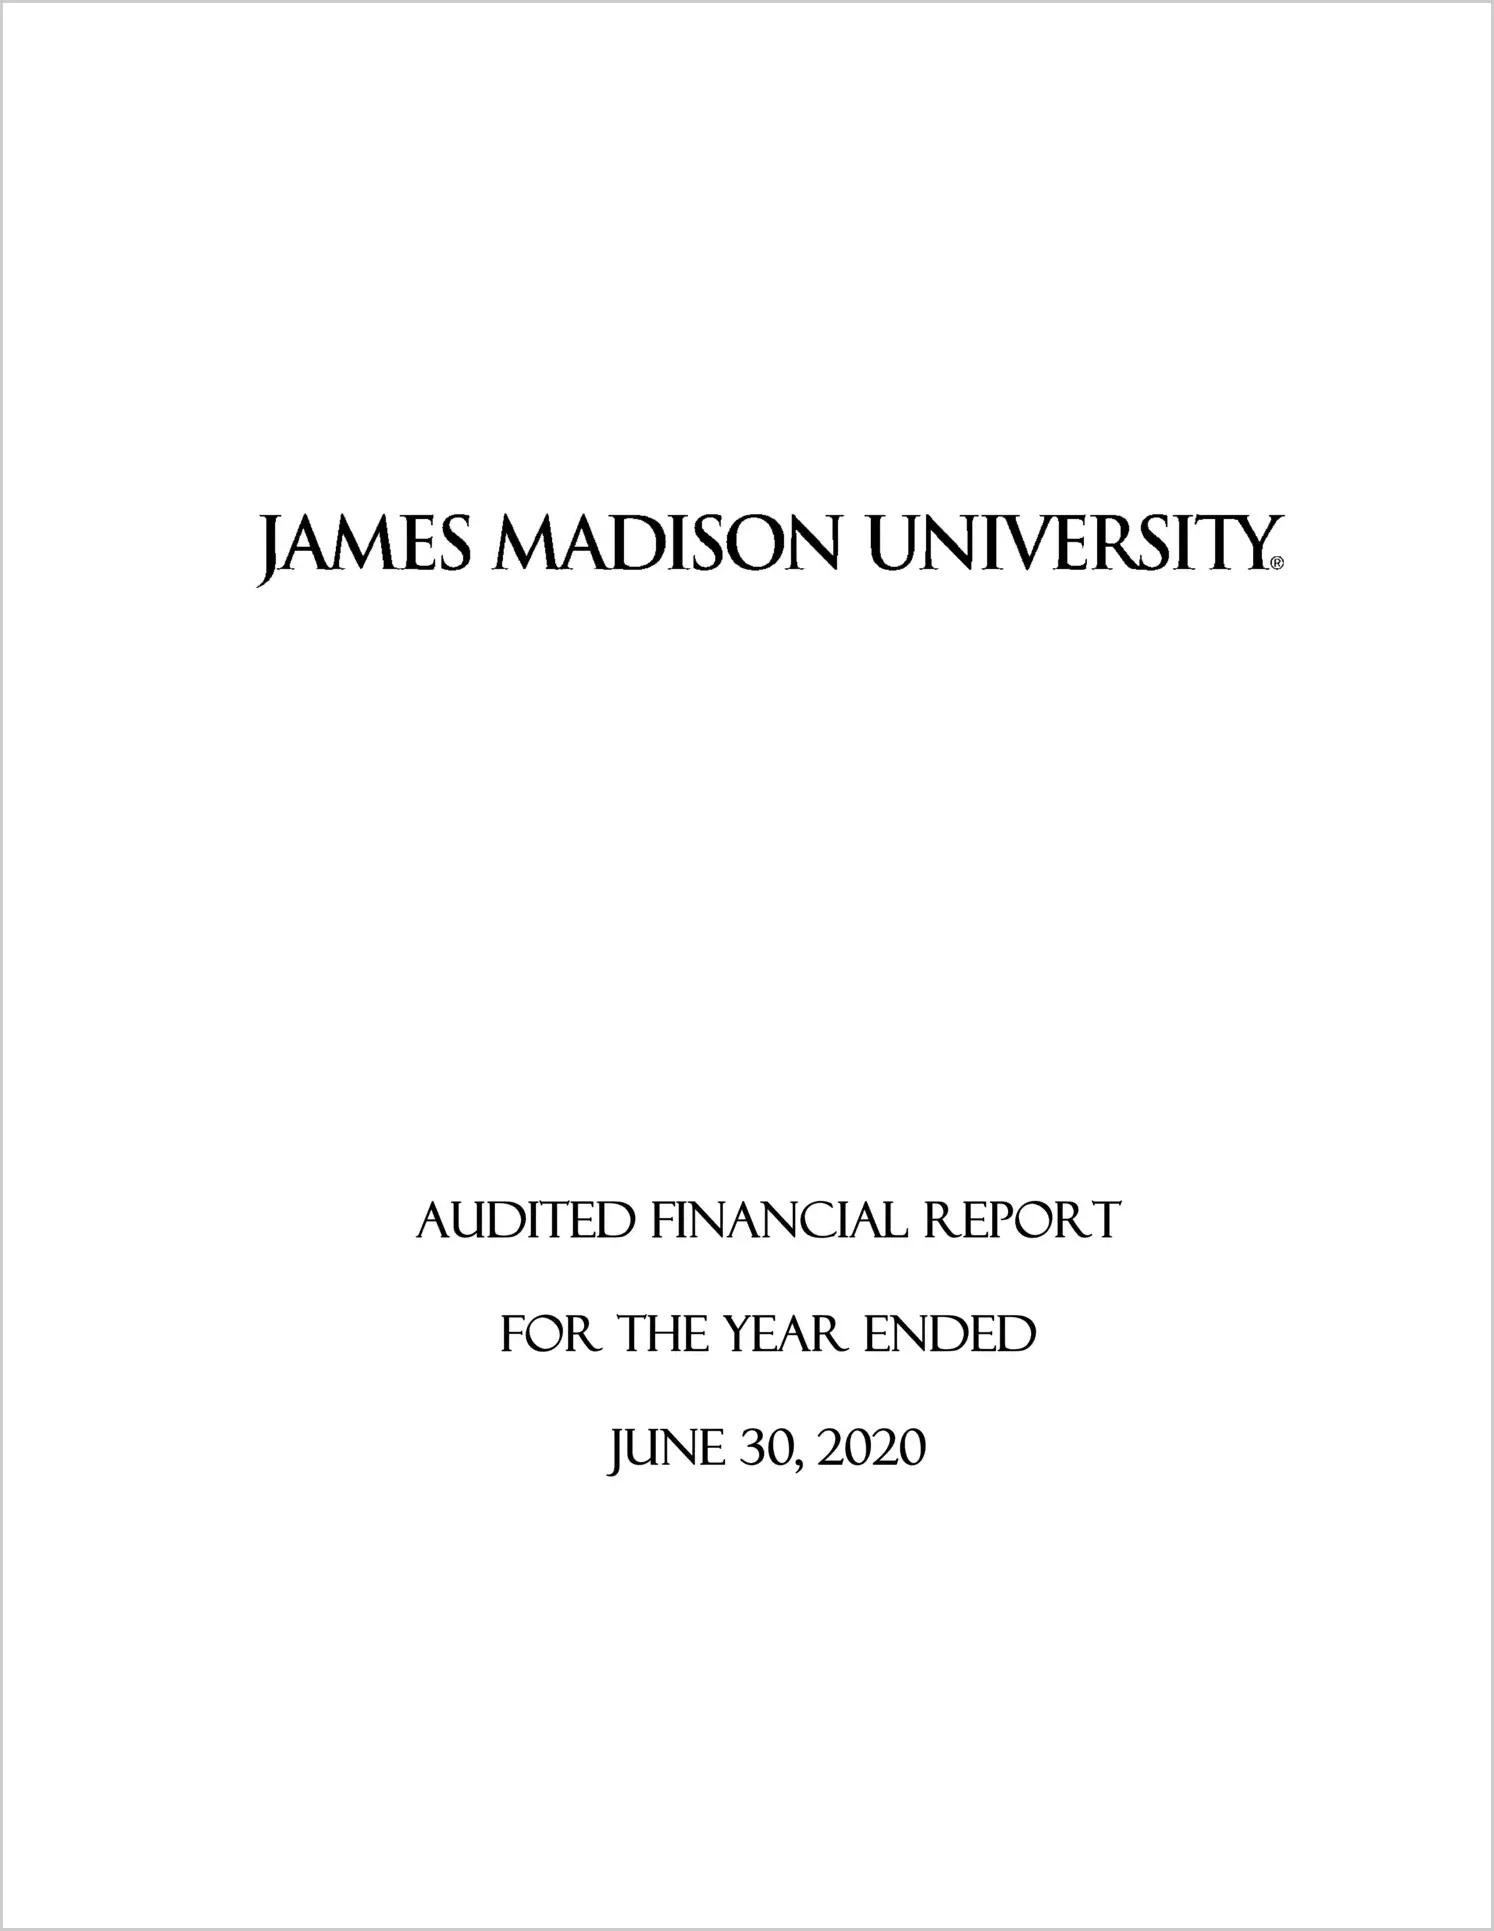 James Madison University Financial Statements for the year ended June 30, 2020